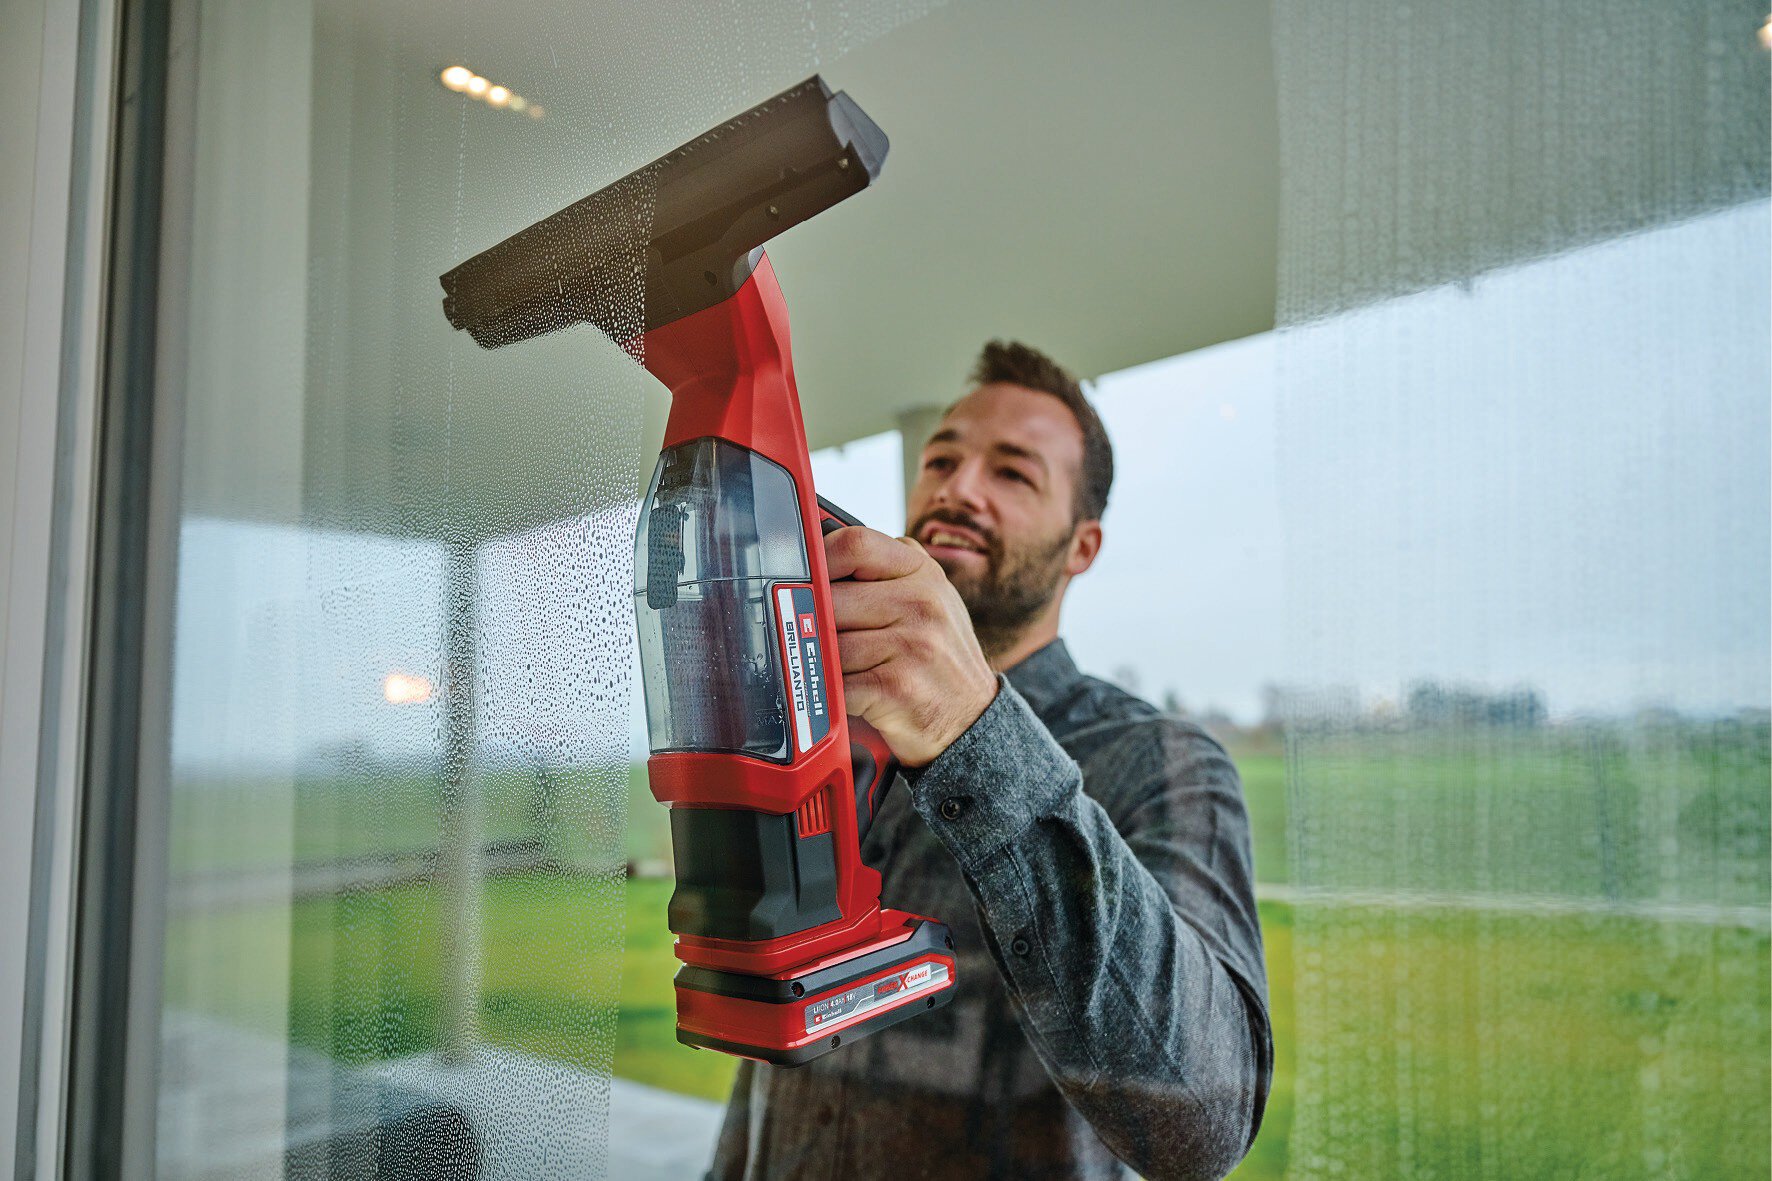 einhell-expert-cordless-window-cleaner-3437100-example_usage-001